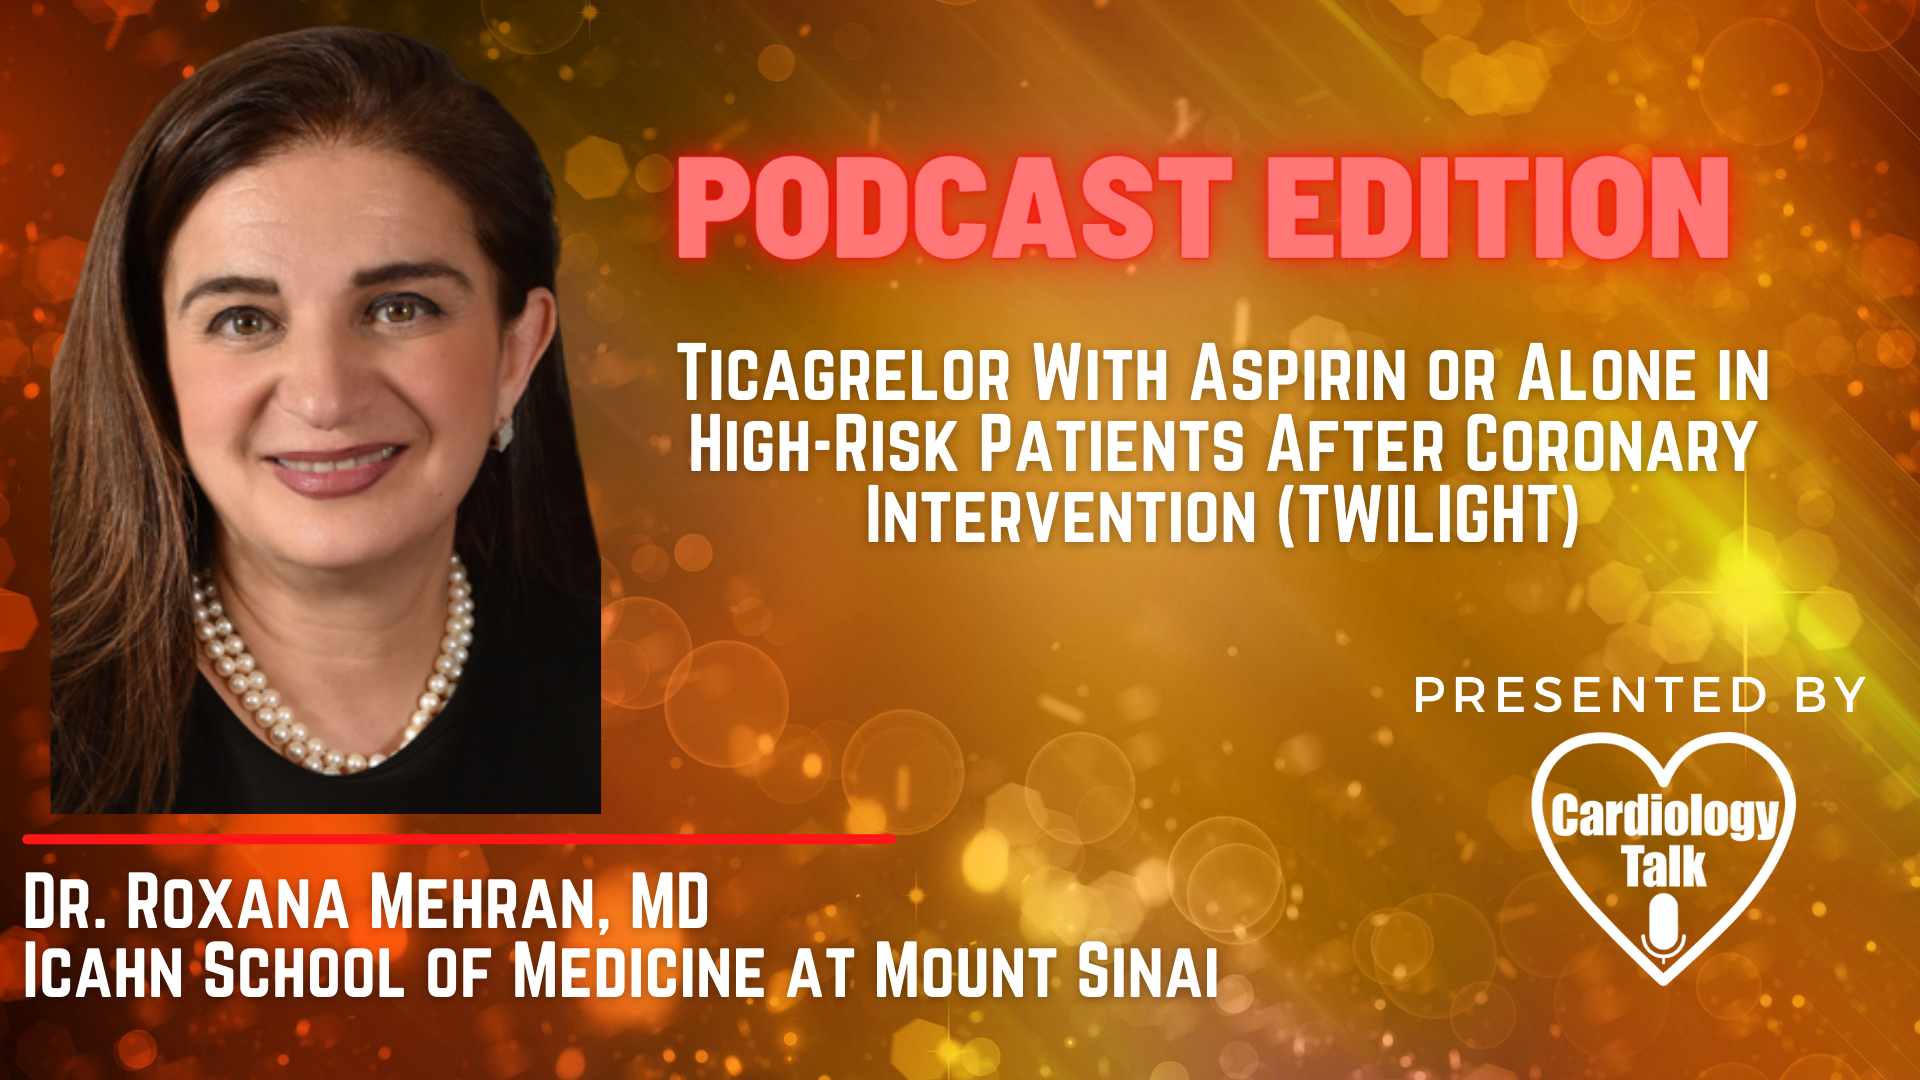 Podcast- Dr. Roxana Mehran, MD - Ticagrelor With Aspirin or Alone in High-Risk Patients After Coronary Intervention (TWILIGHT)